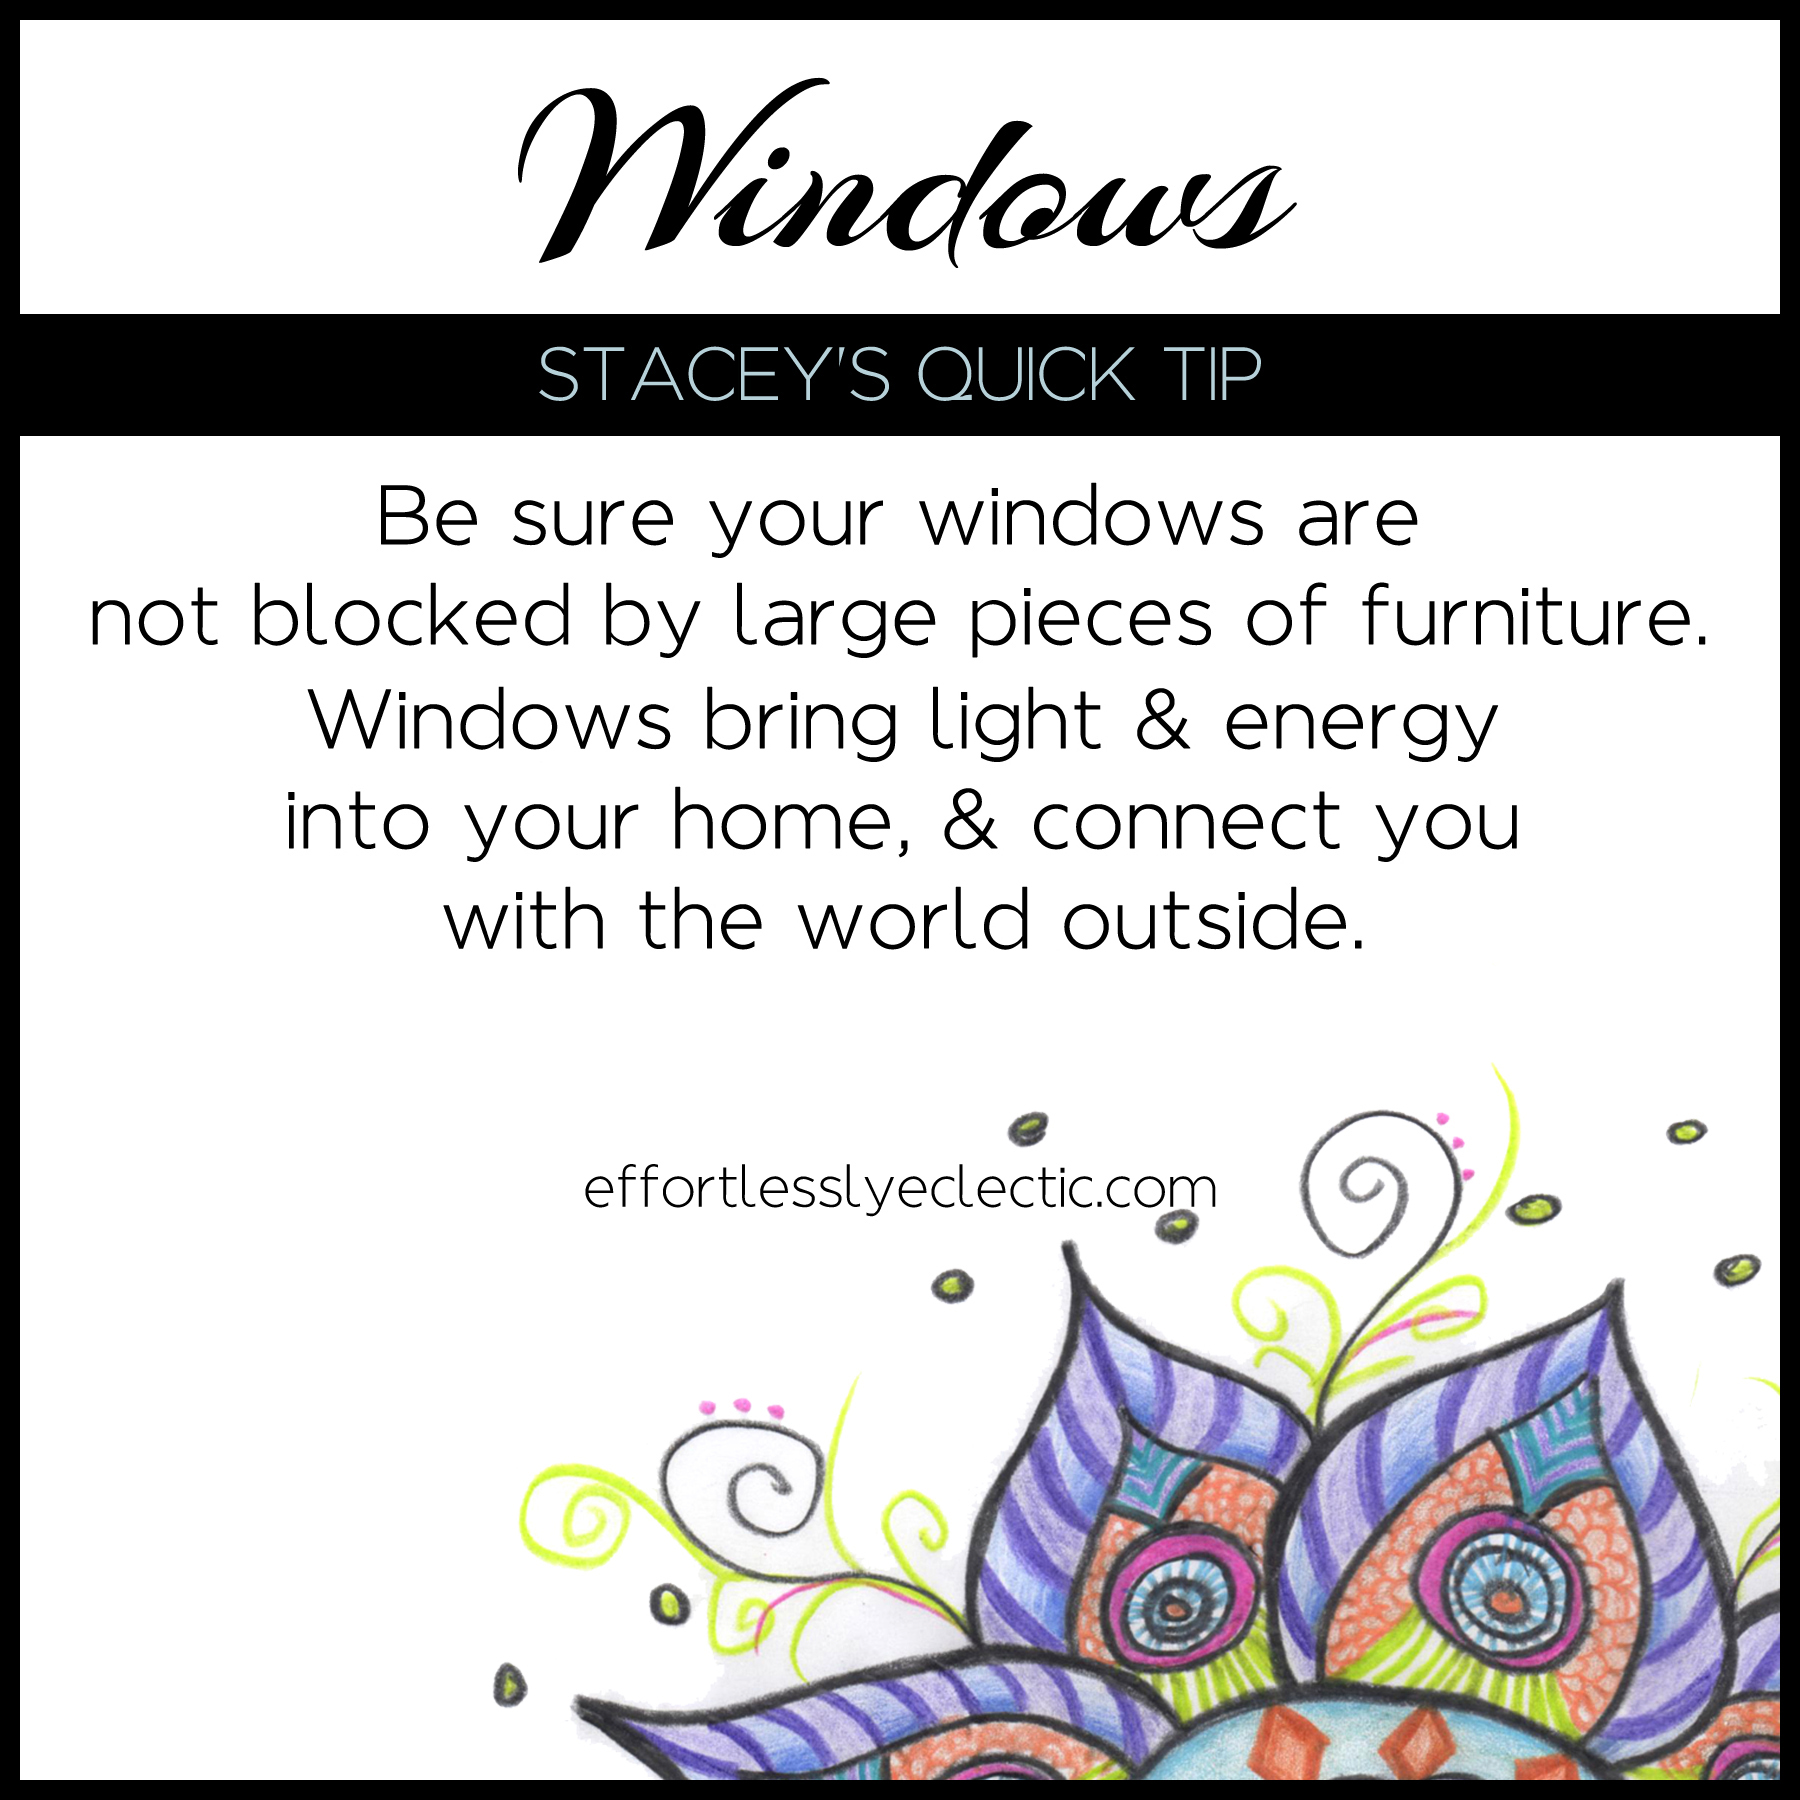 Windows - A home decor tip about windows in your home